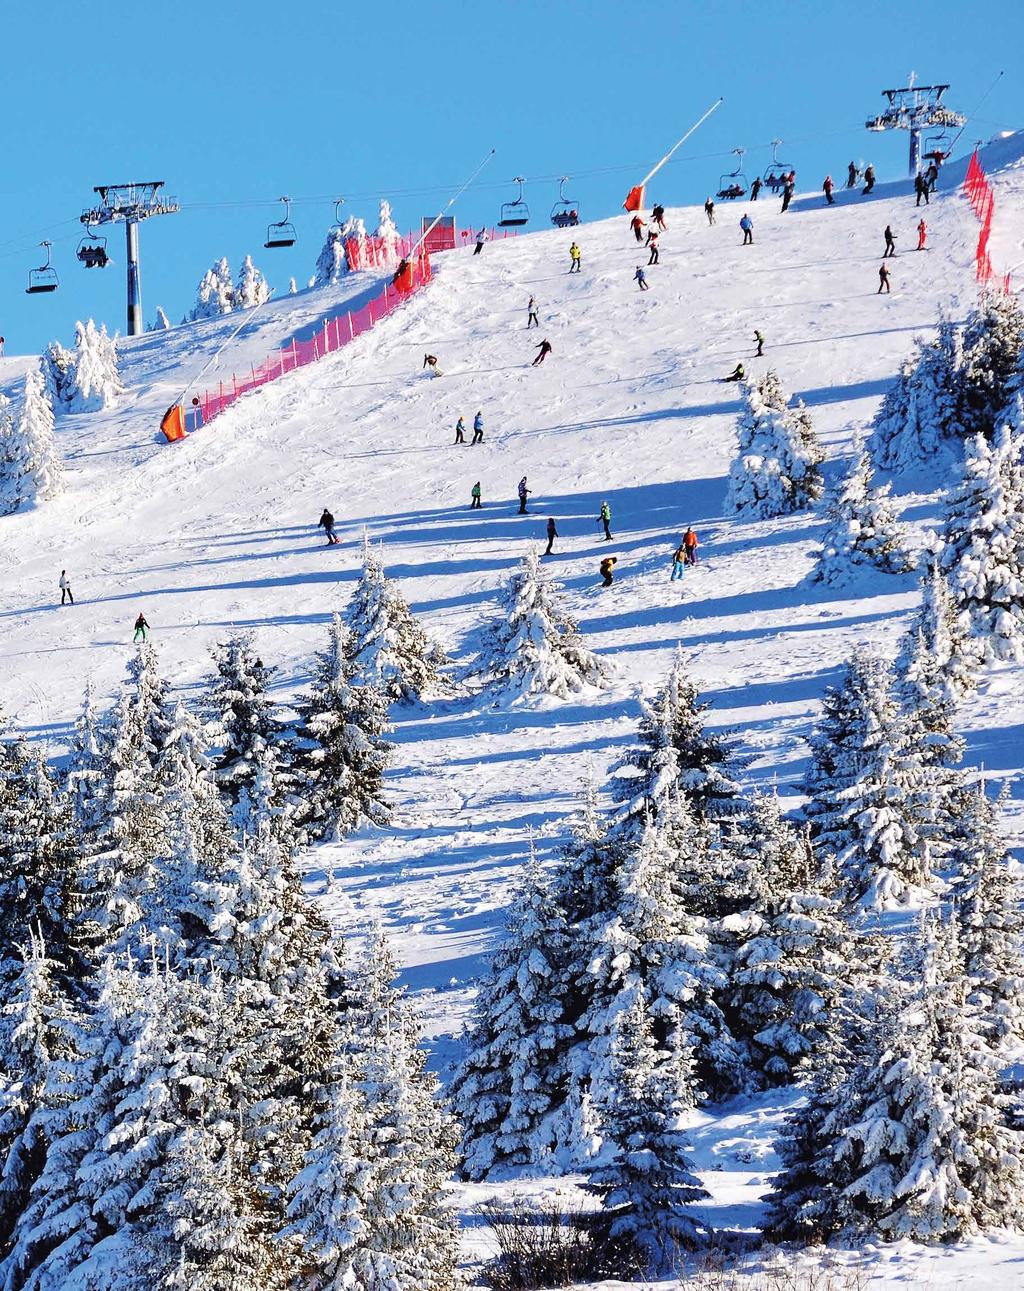 KOPAONIK Kopaonik, the biggest mountain chain in Serbia, for years has been the leader of winter touristic offer of the country.